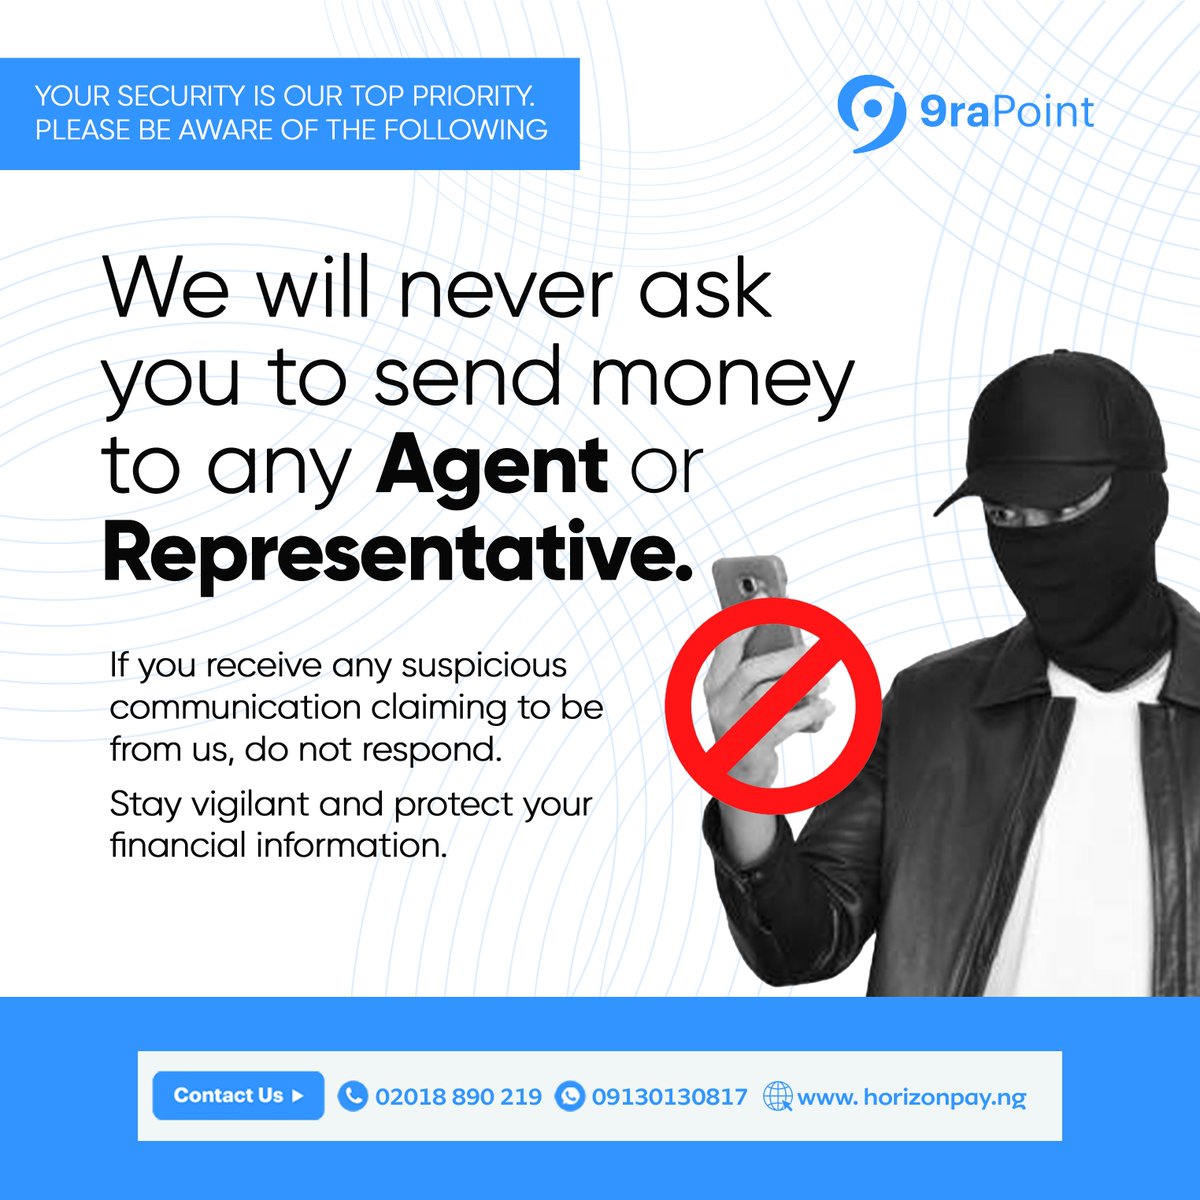 Your security is our top priority. 
Please be aware that We will never ask you to send money to any Agent or Representative❗

If you receive any suspicious communication or claiming to be from us, do not respond.

Contact us via 
call: 02018890219
WhatsApp: 09130130817